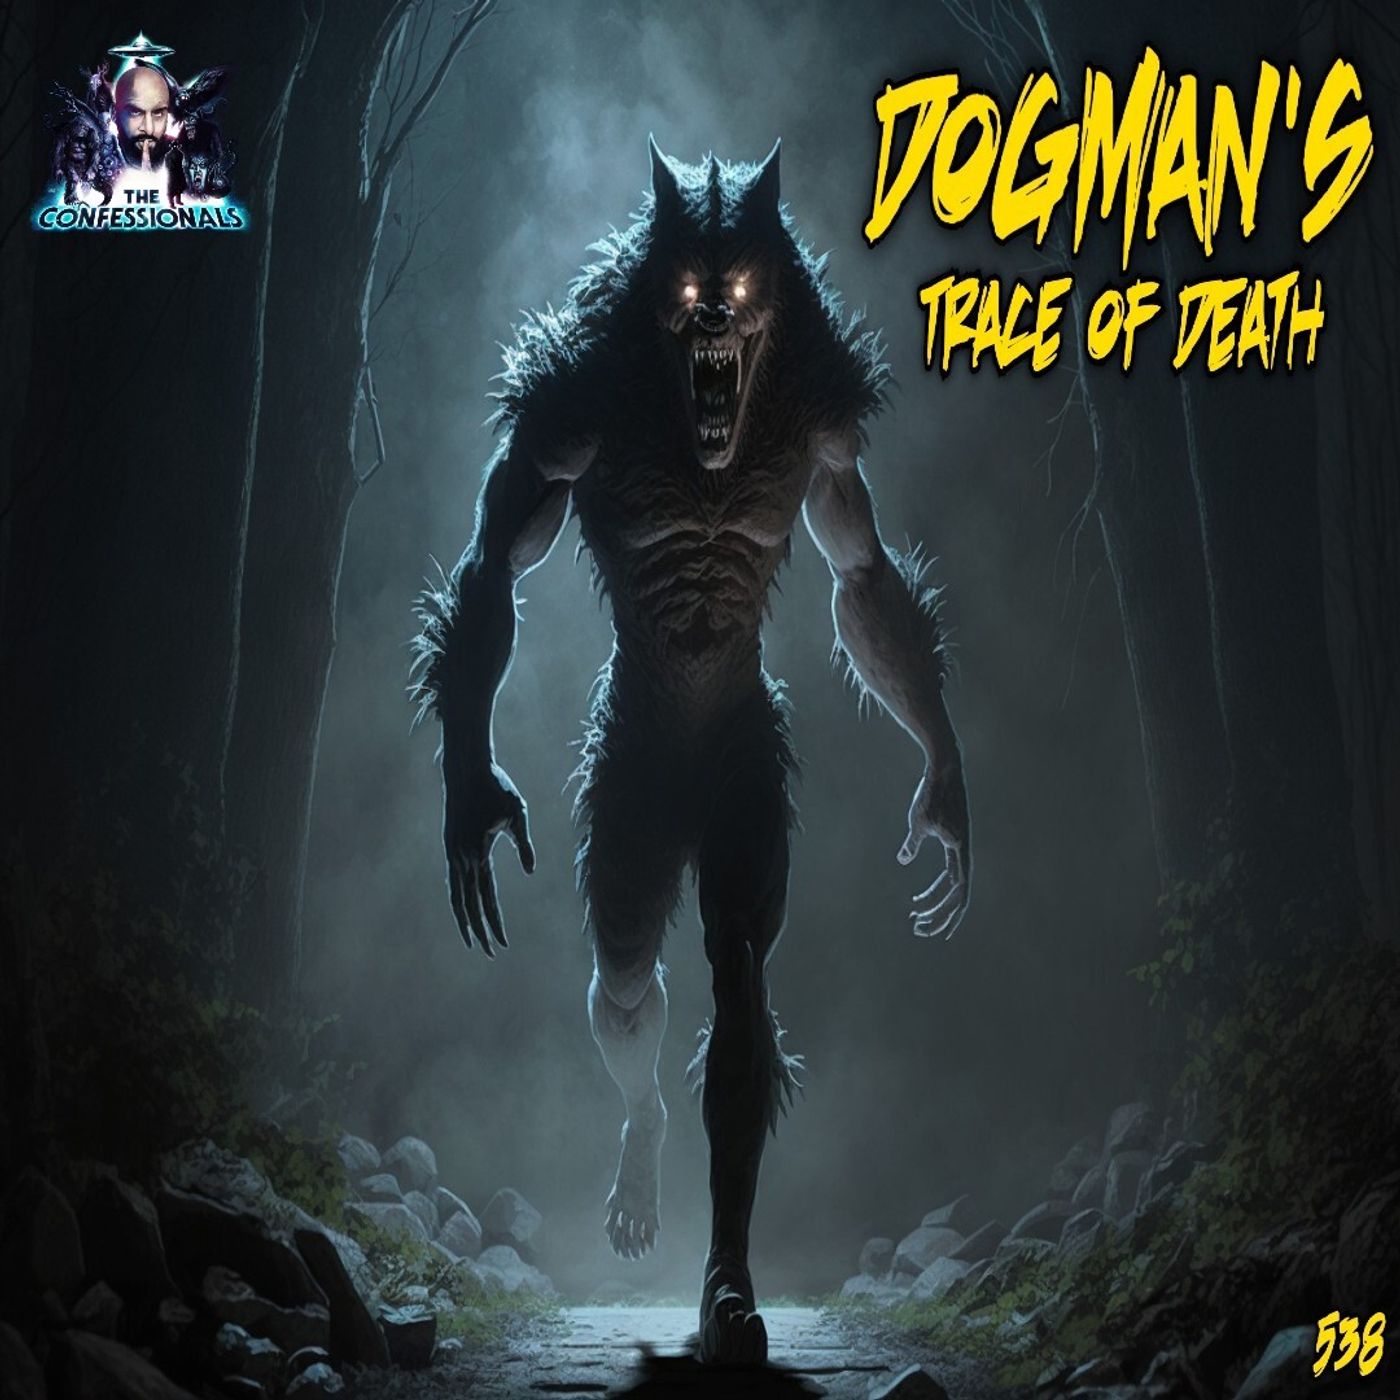 538: Dogman’s Trace Of Death